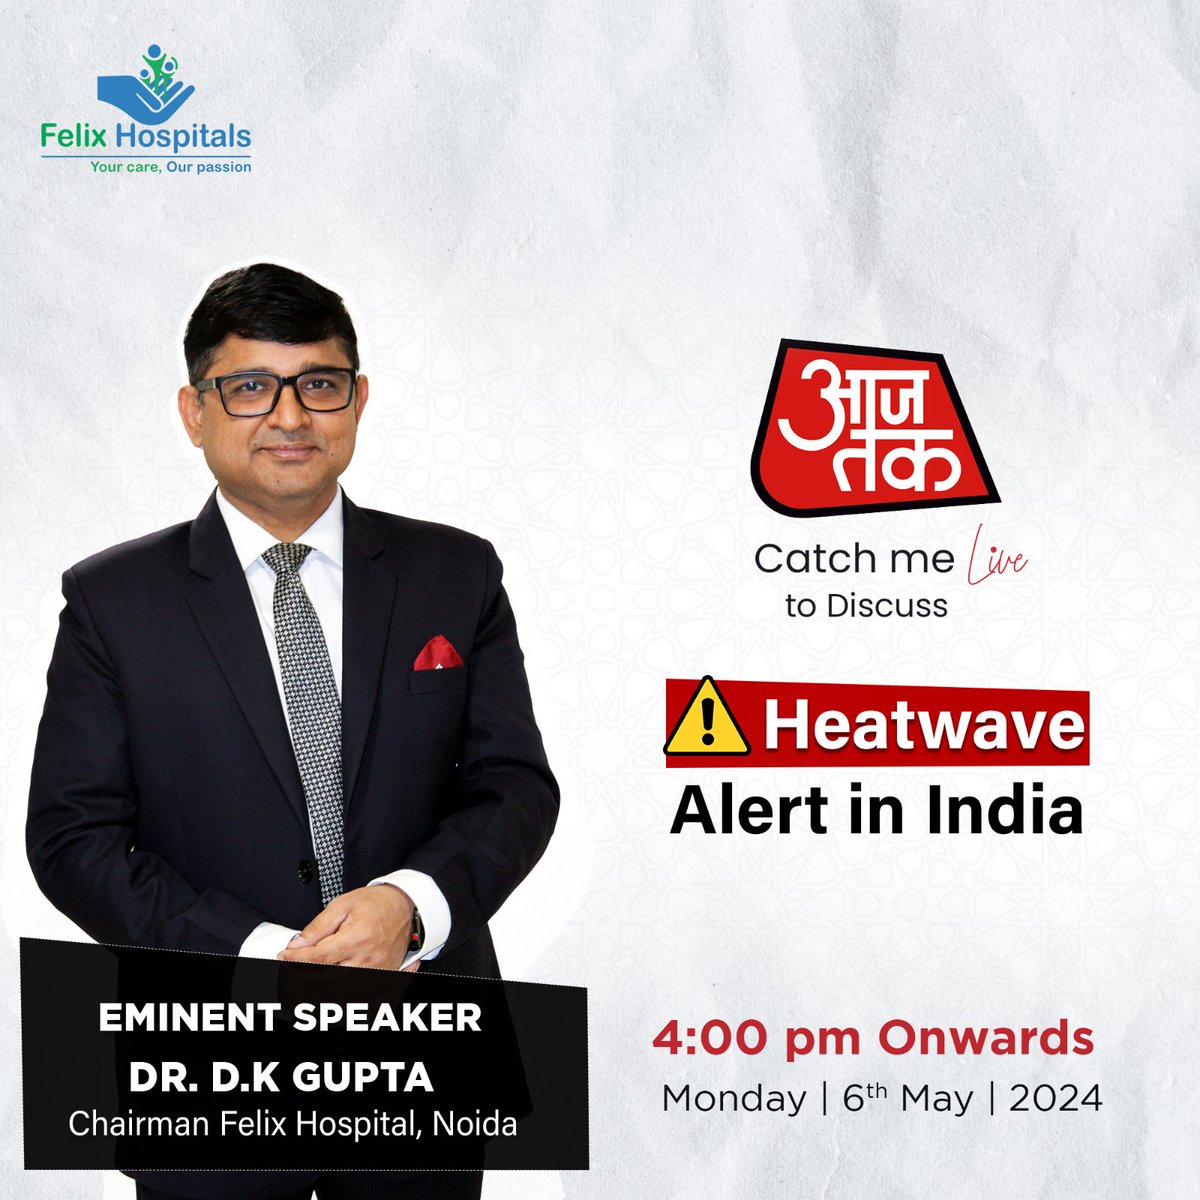 Join me live on Aaj Tak as I discuss the Heatwave in India Tune in for valuable insights! #live #aajtak #news #liveshow #newsfeed #heating #heatwave #ComingLive #exploremore #felixhospital